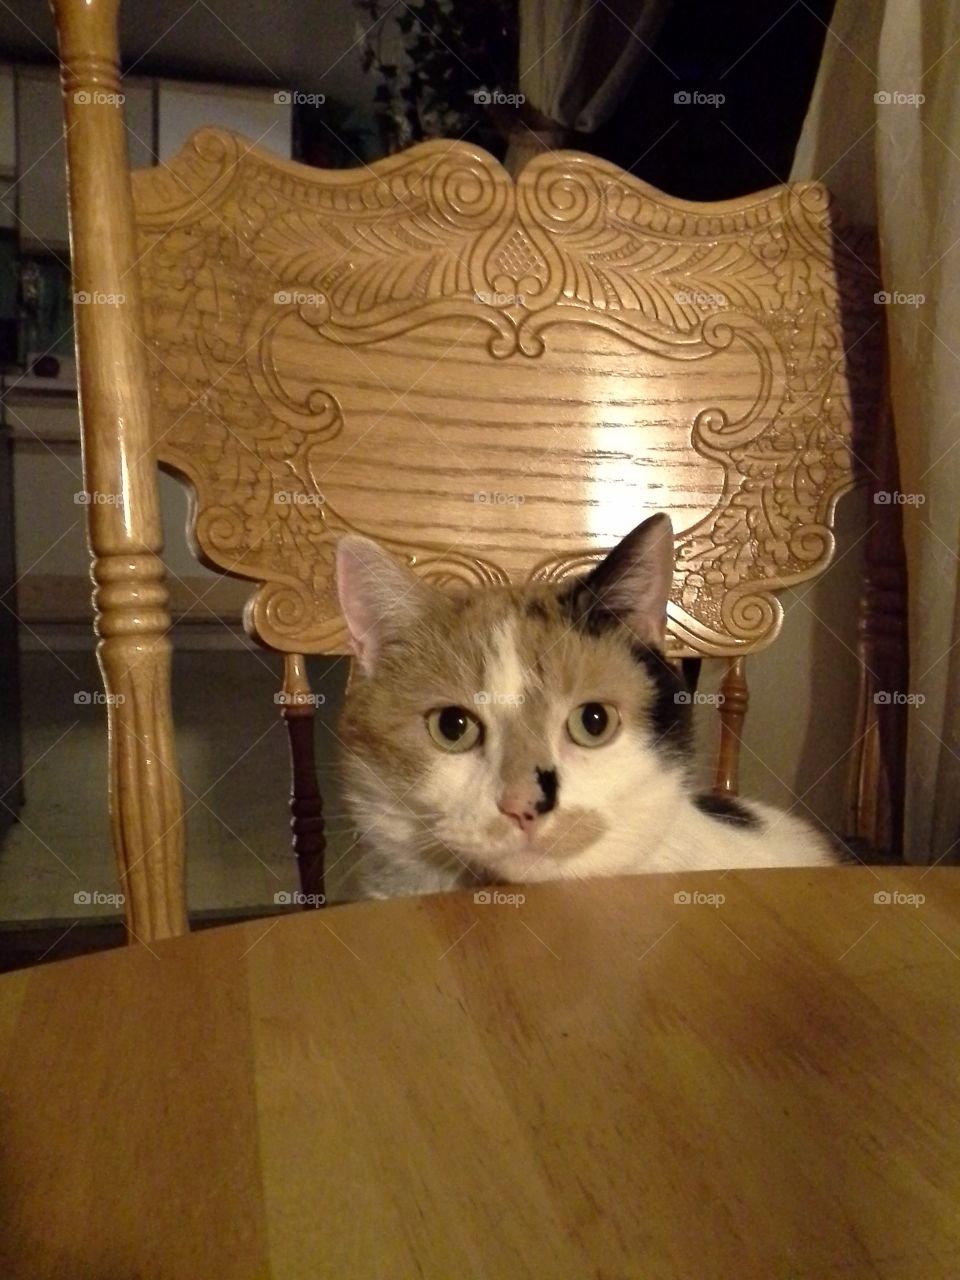 Booboo is ready for dinner.. Booboo decided to sit with us one night for dinner too.